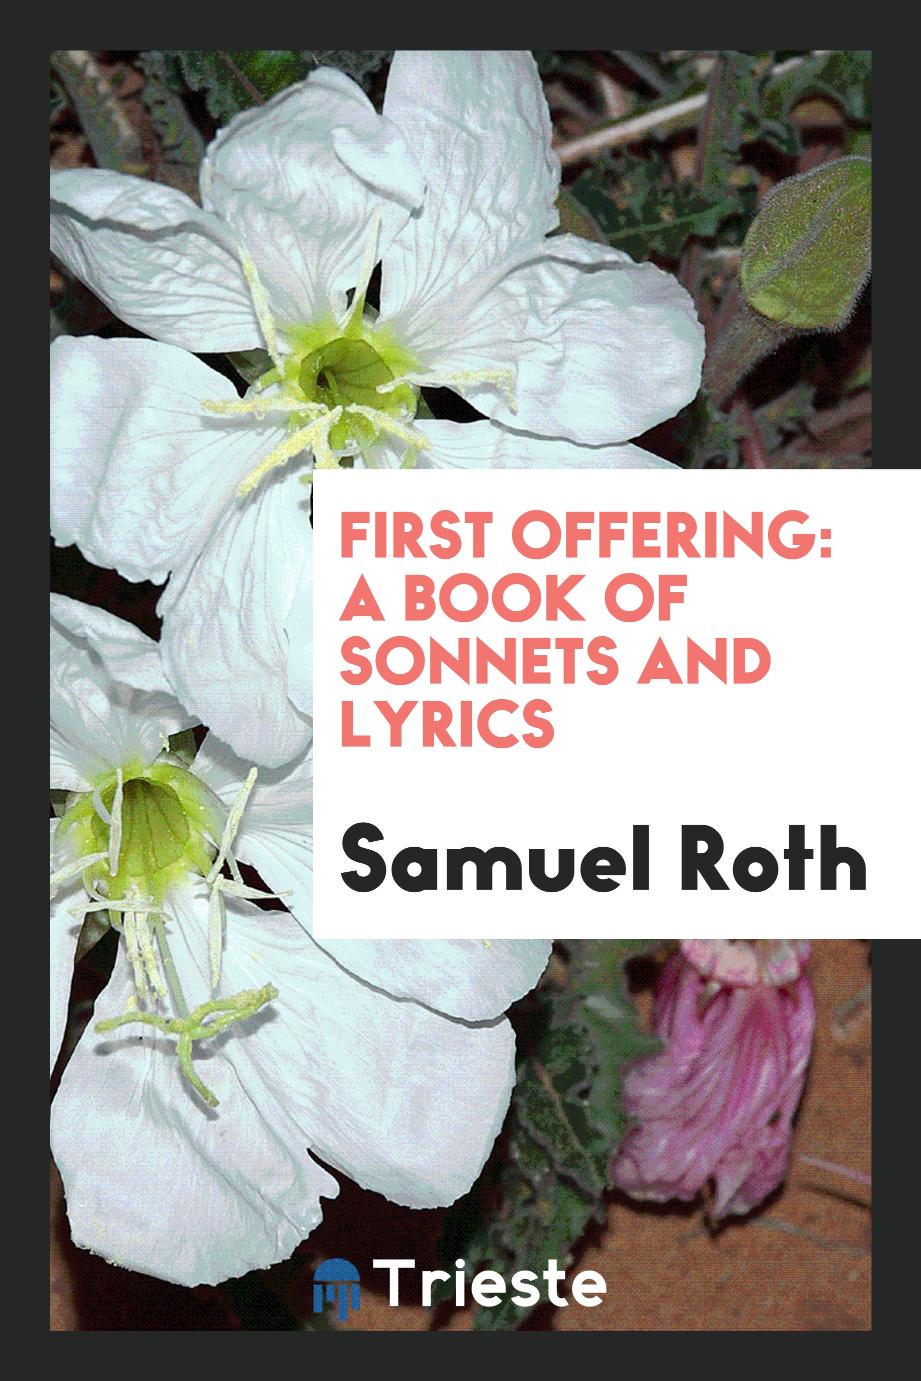 First Offering: A Book of Sonnets and Lyrics